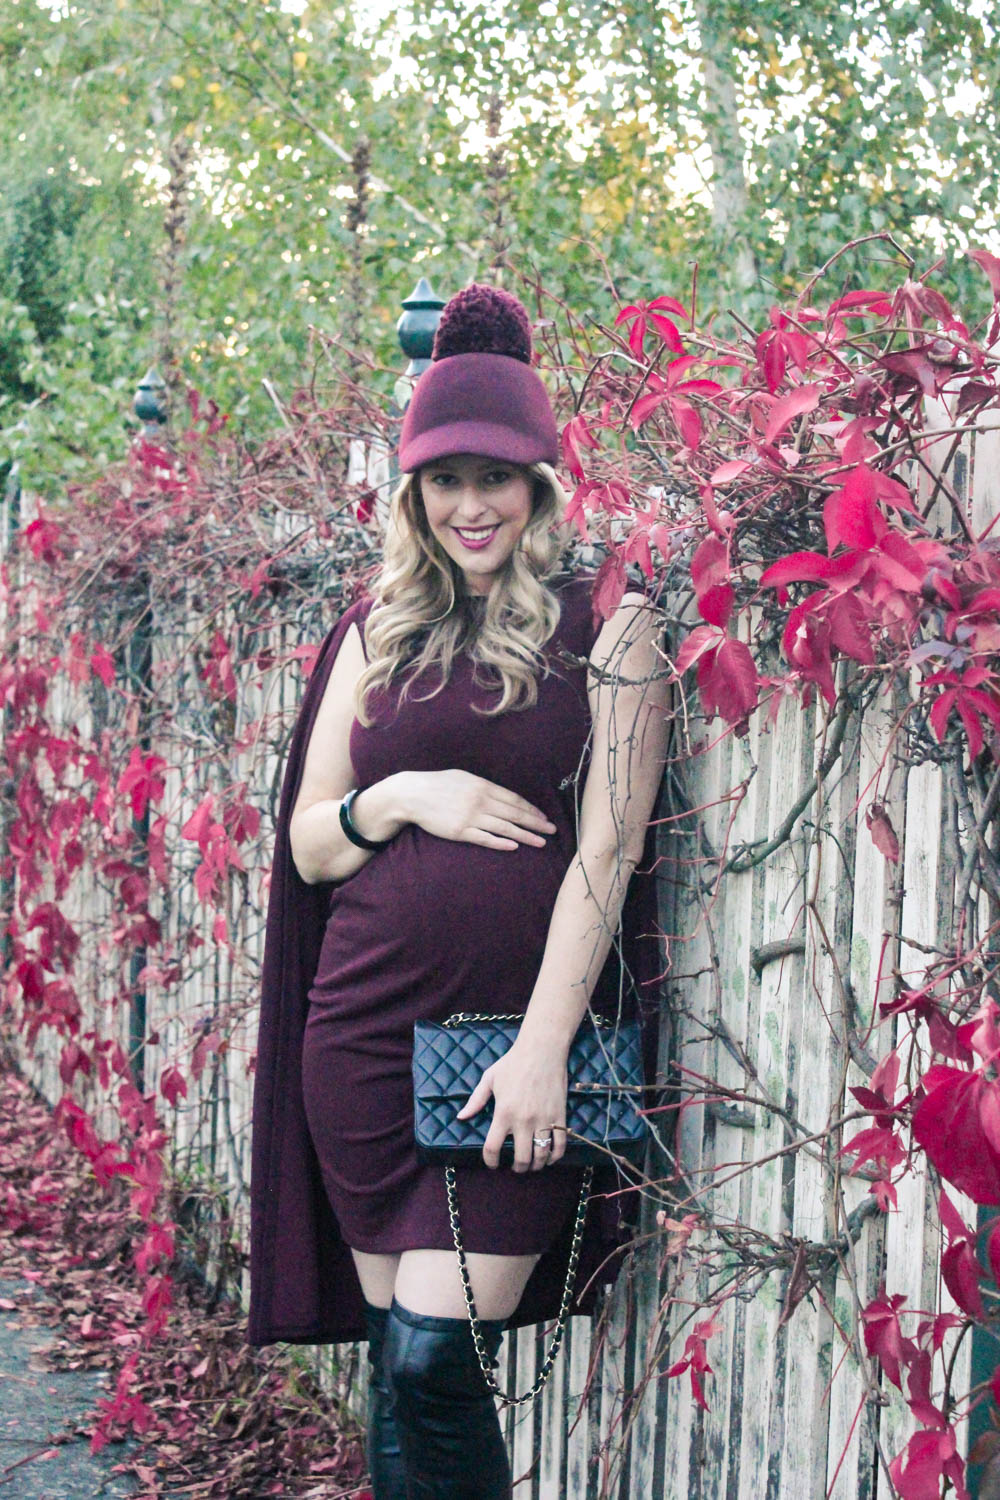 Visit the Goldfields Girl blog for more maternity style tips